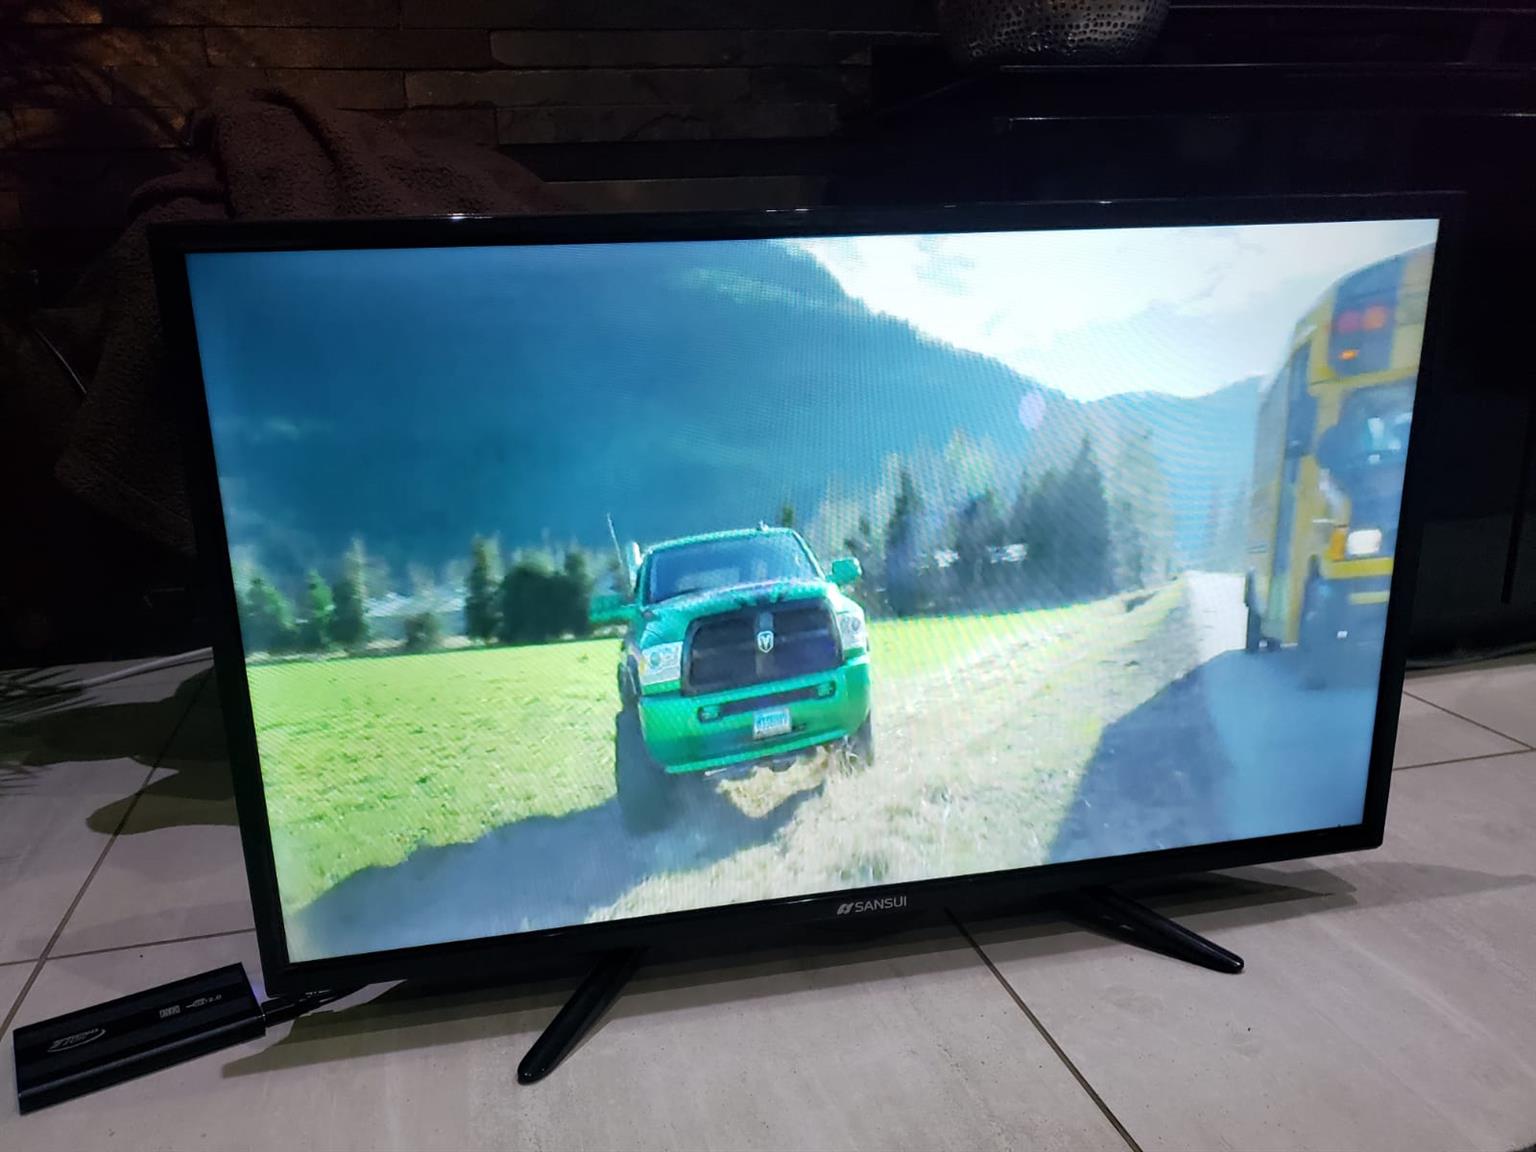 Sansui 32" Smart Android LED TV for sale